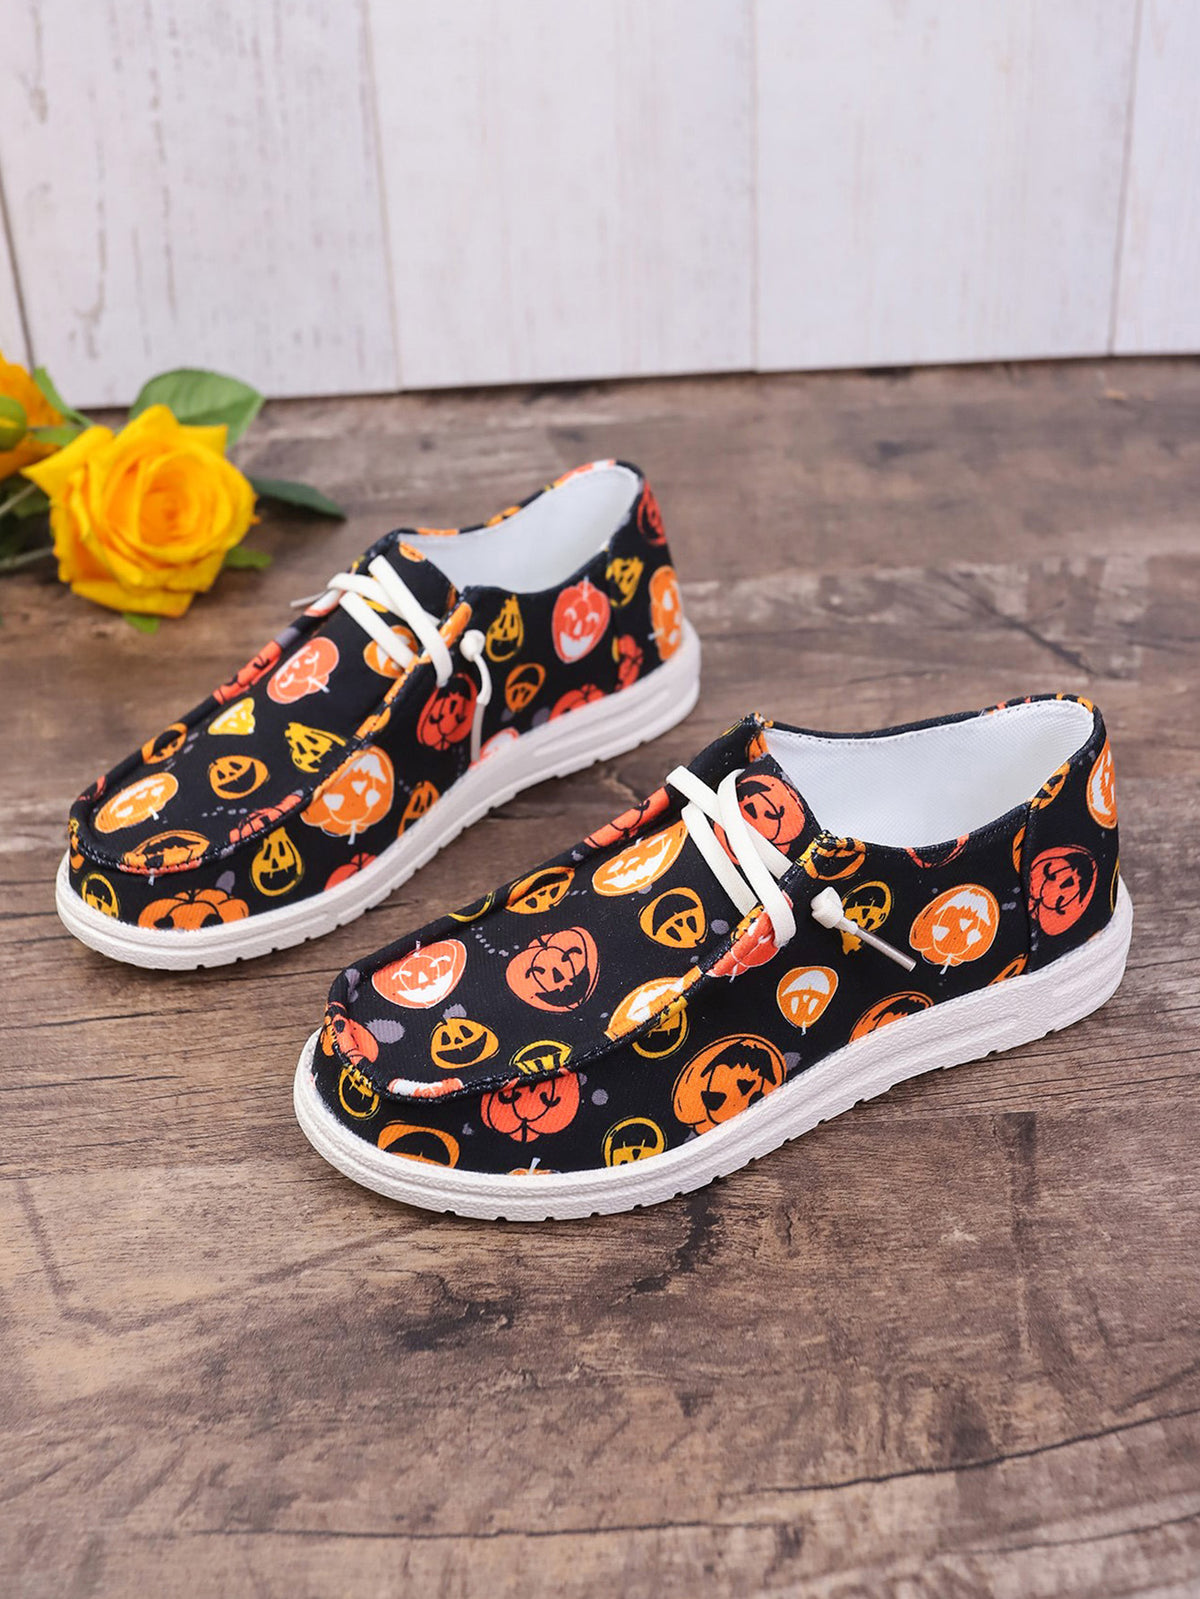 Halloween Pumpkin Graphic Print Lace-Up Slip-On Loafers